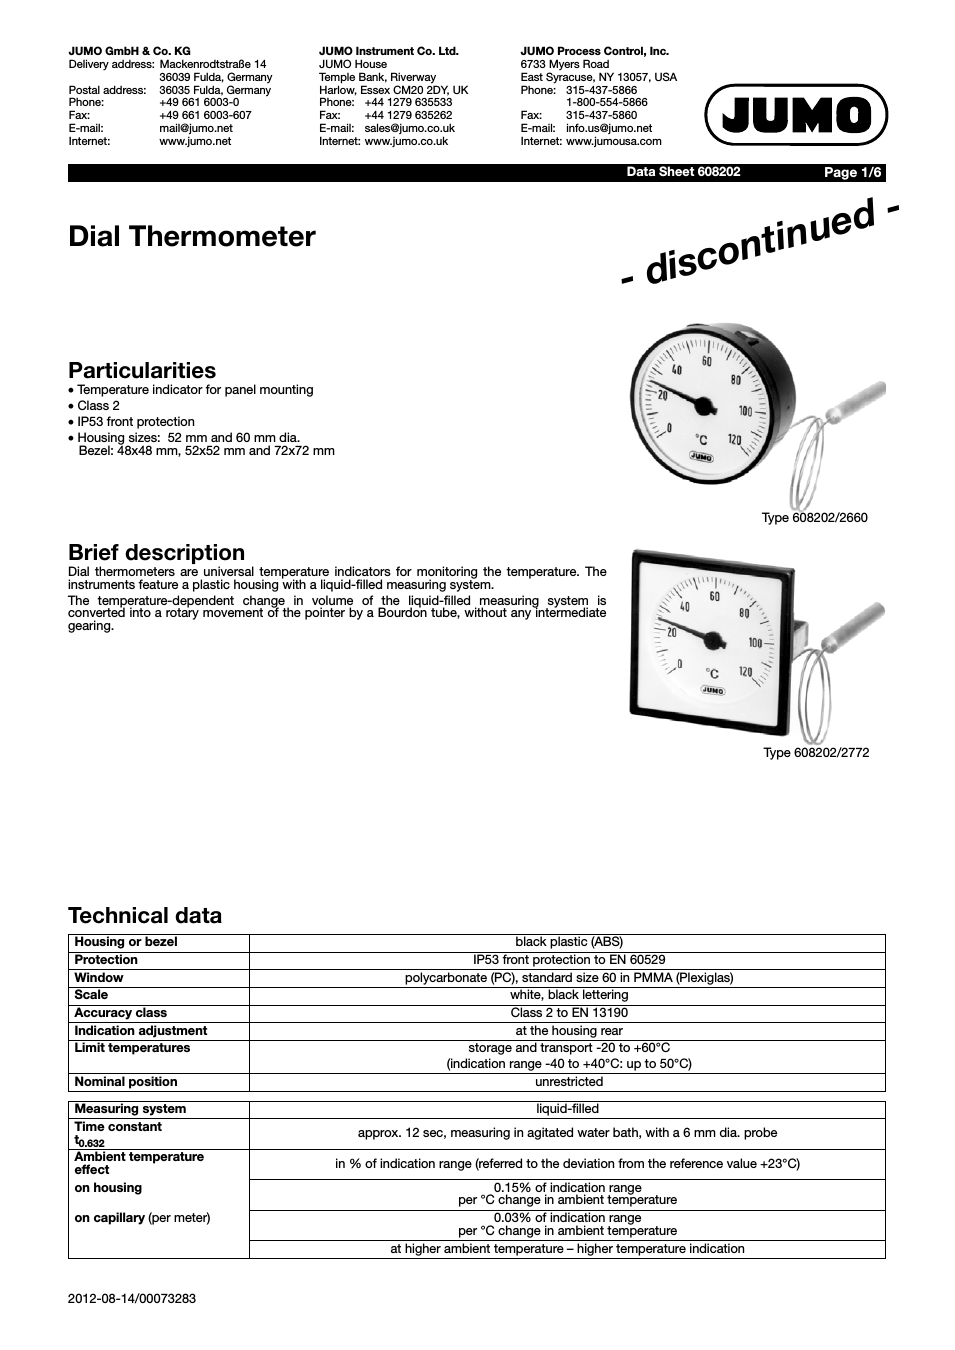 608202 Dial Thermometer Data Sheet